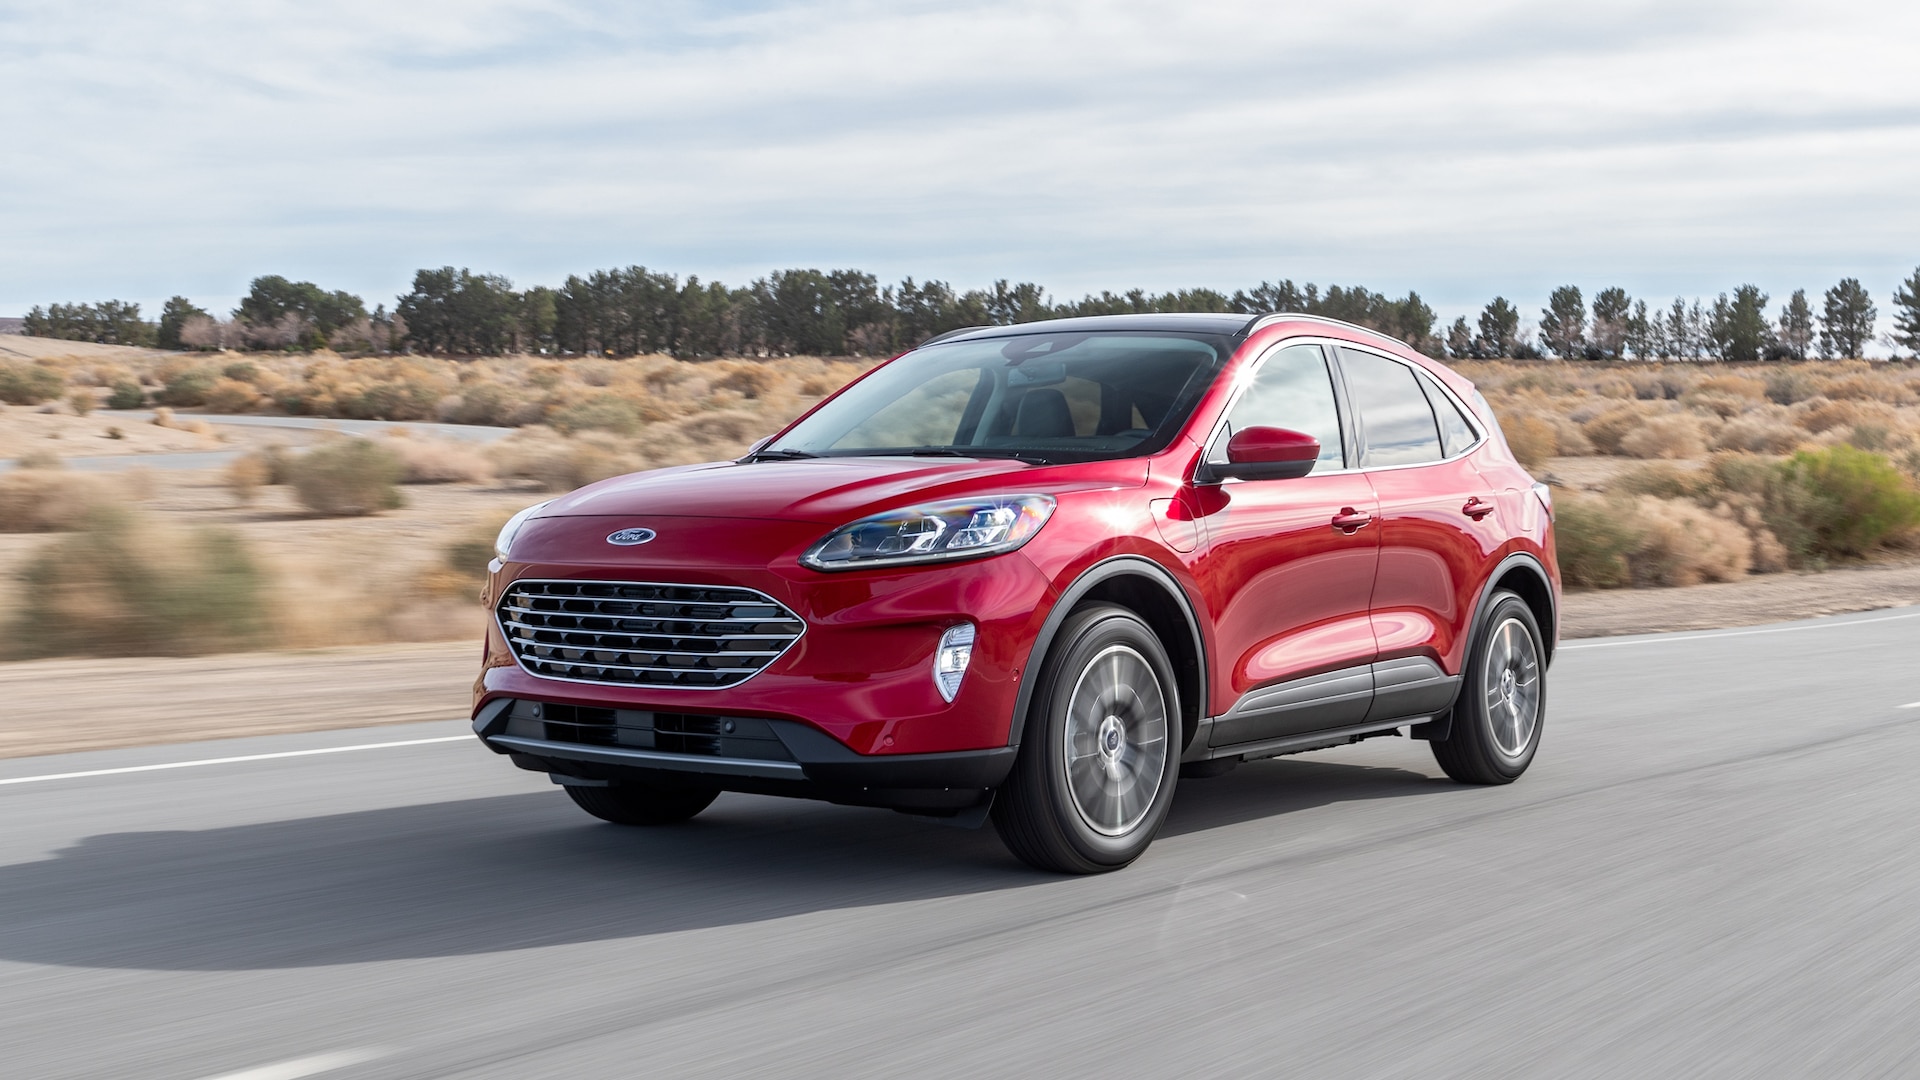 2021 Ford Escape Titanium Plug-In Hybrid FWD First Test: Money in the Bank